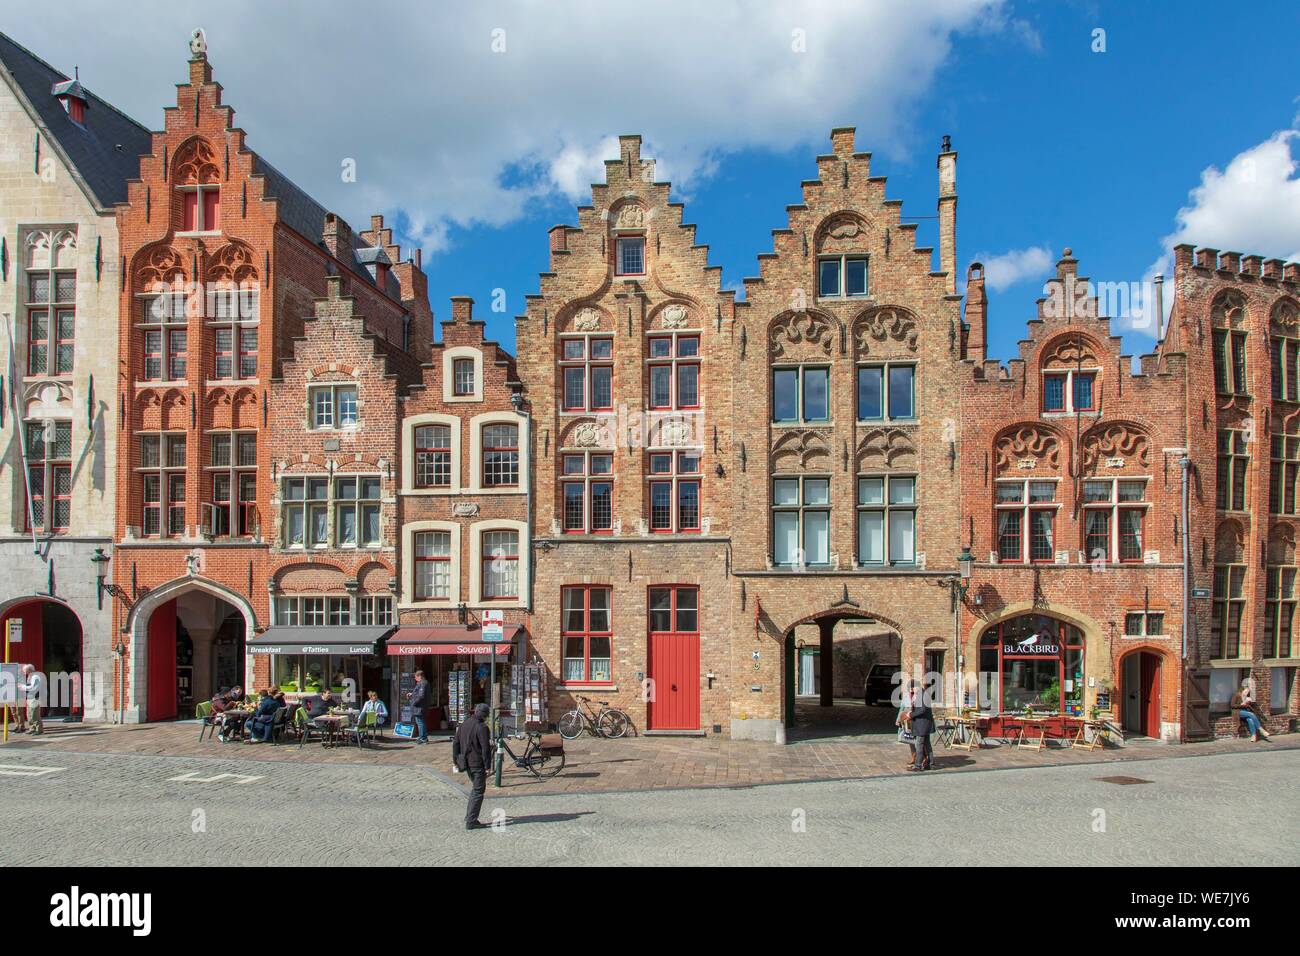 Belgium, Western Flanders, Bruges, historical centre listed as World Heritage by UNESCO, Jan Van Eyck square, brick facades with stepped gables Stock Photo